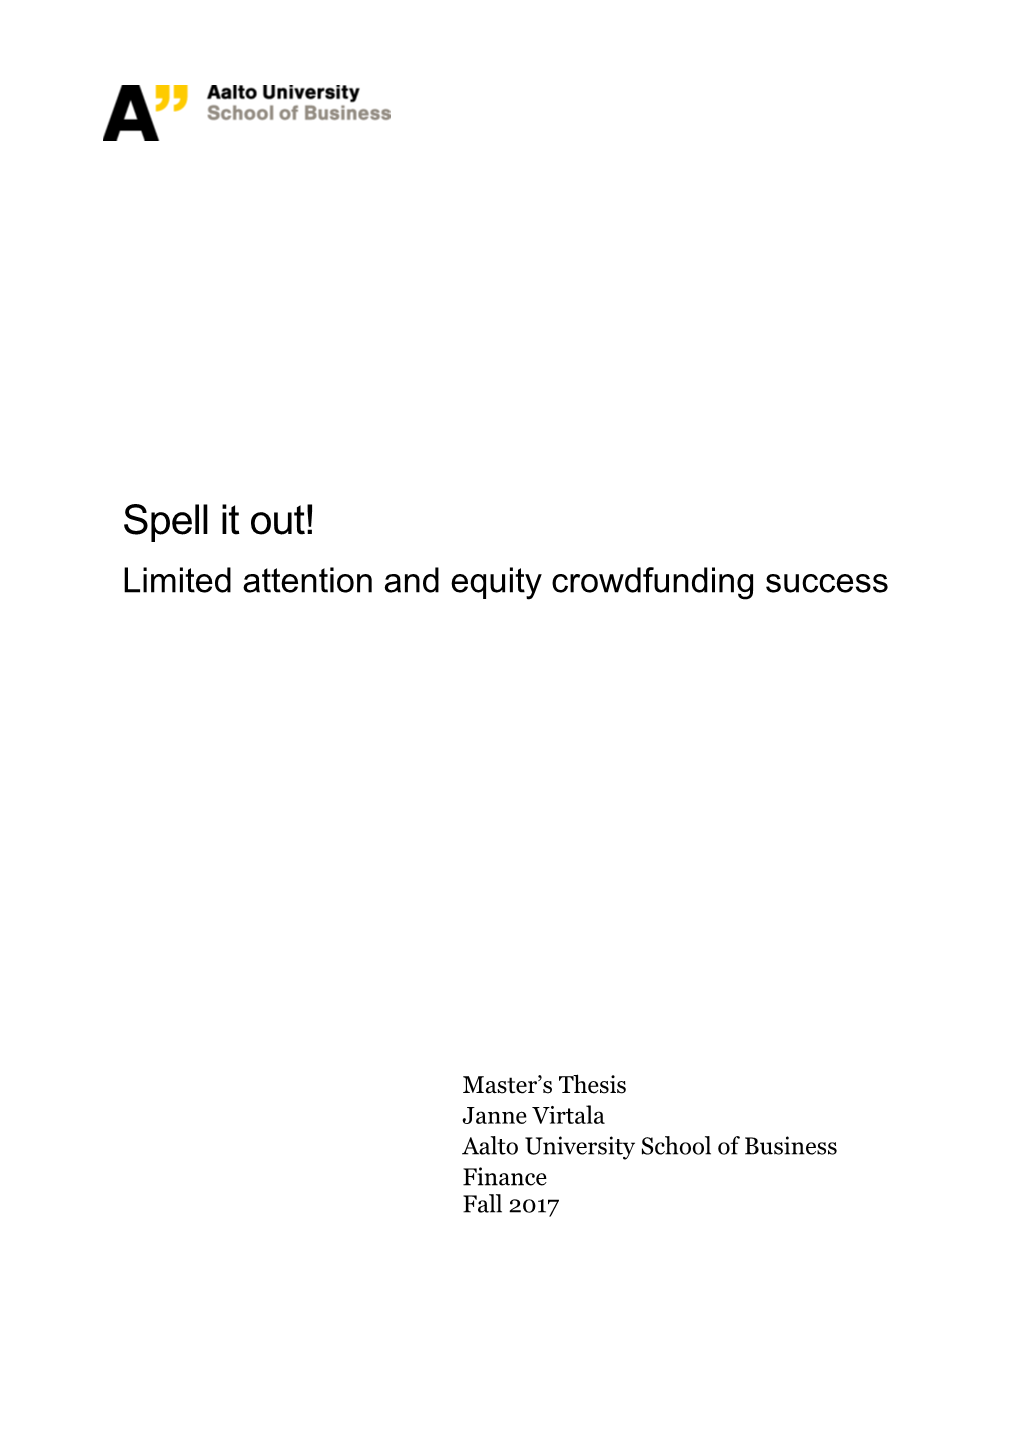 Spell It Out! Limited Attention and Equity Crowdfunding Success